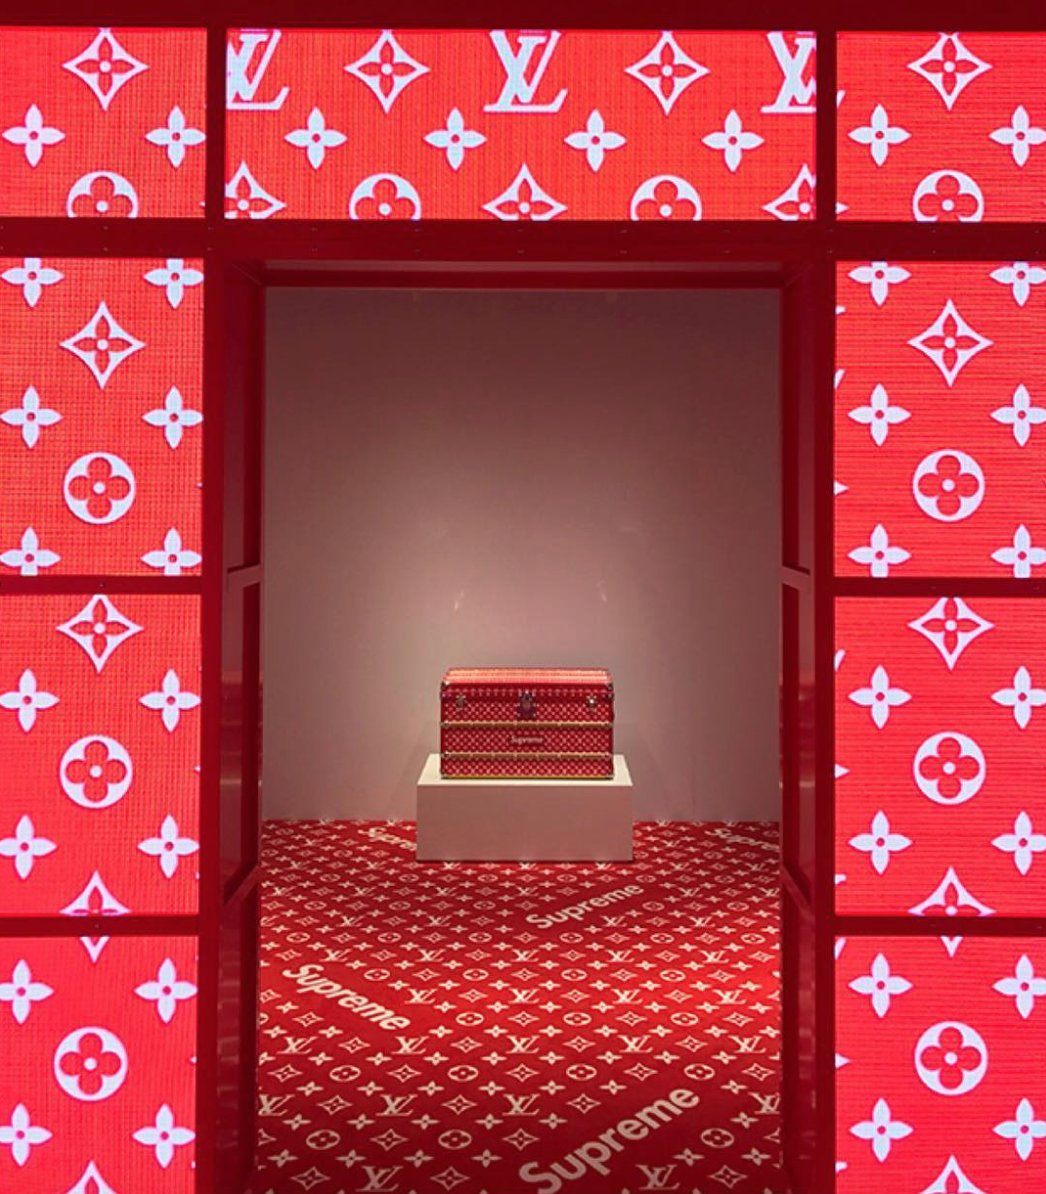 Louis Vuitton x Supreme Pop-ups Are Coming Soon